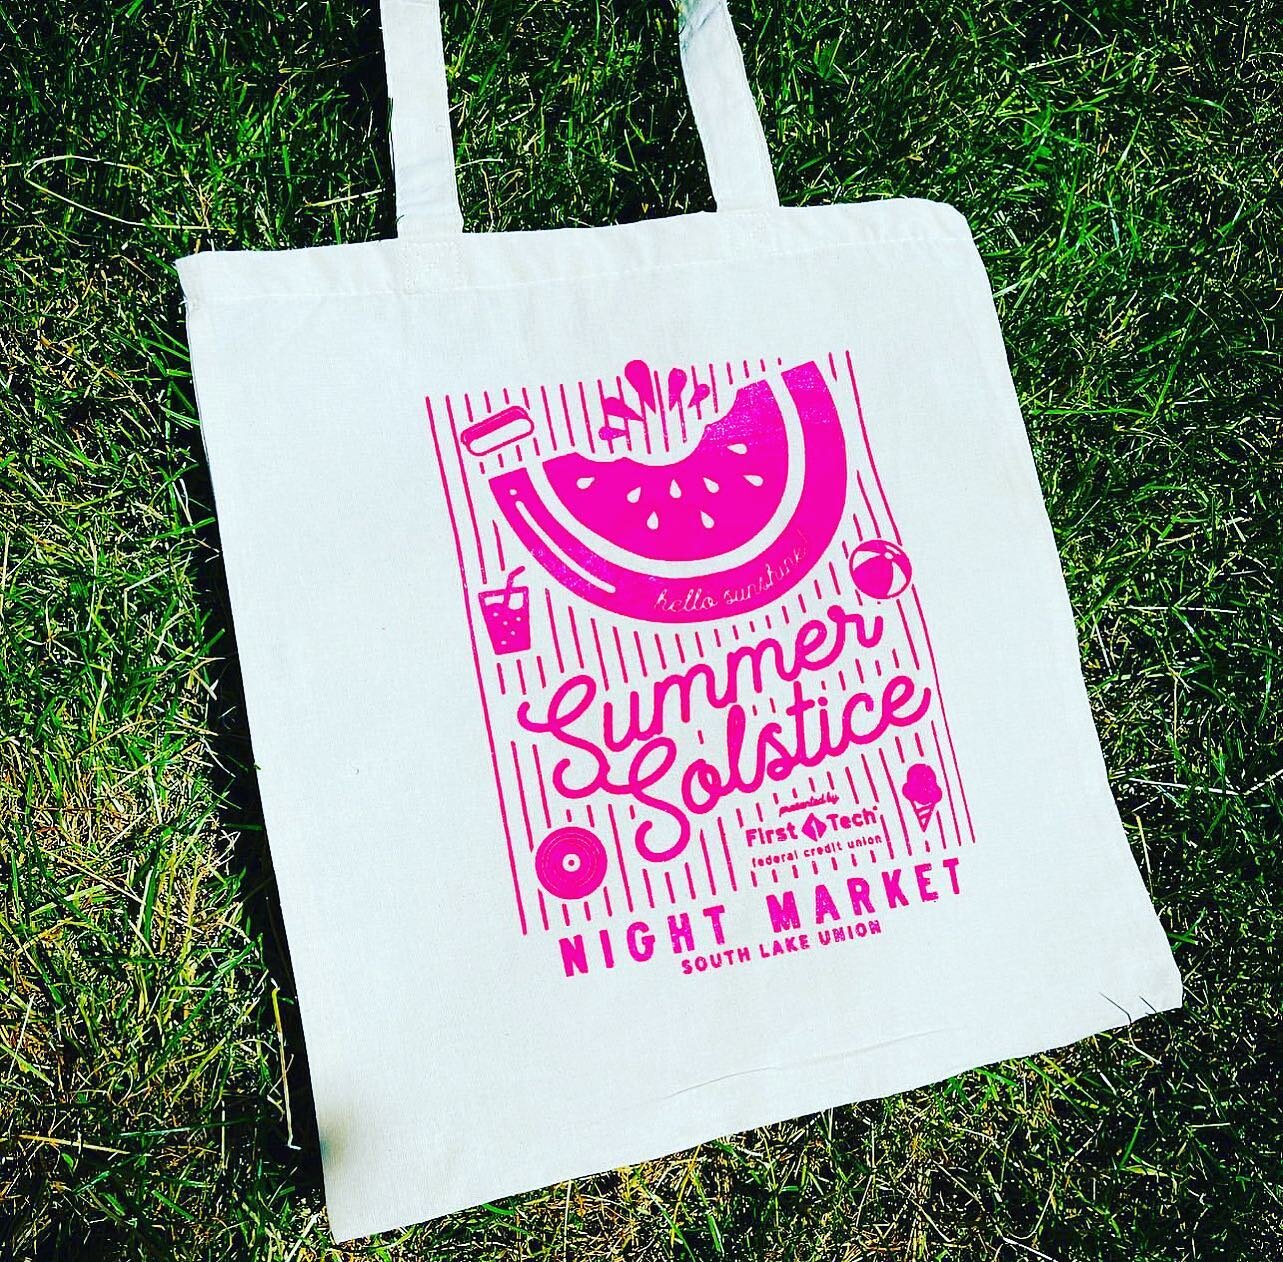 FREE TOTES are back today! Grab brunch or spend $25 from one of our favorite shops curbside to snag a FREE tote bag TODAY at @slusaturdaymarket ! Redeem at our Info Booth (while they last)! Courtesy of @firsttechfed &amp; @seattlenightmarkets #seattl